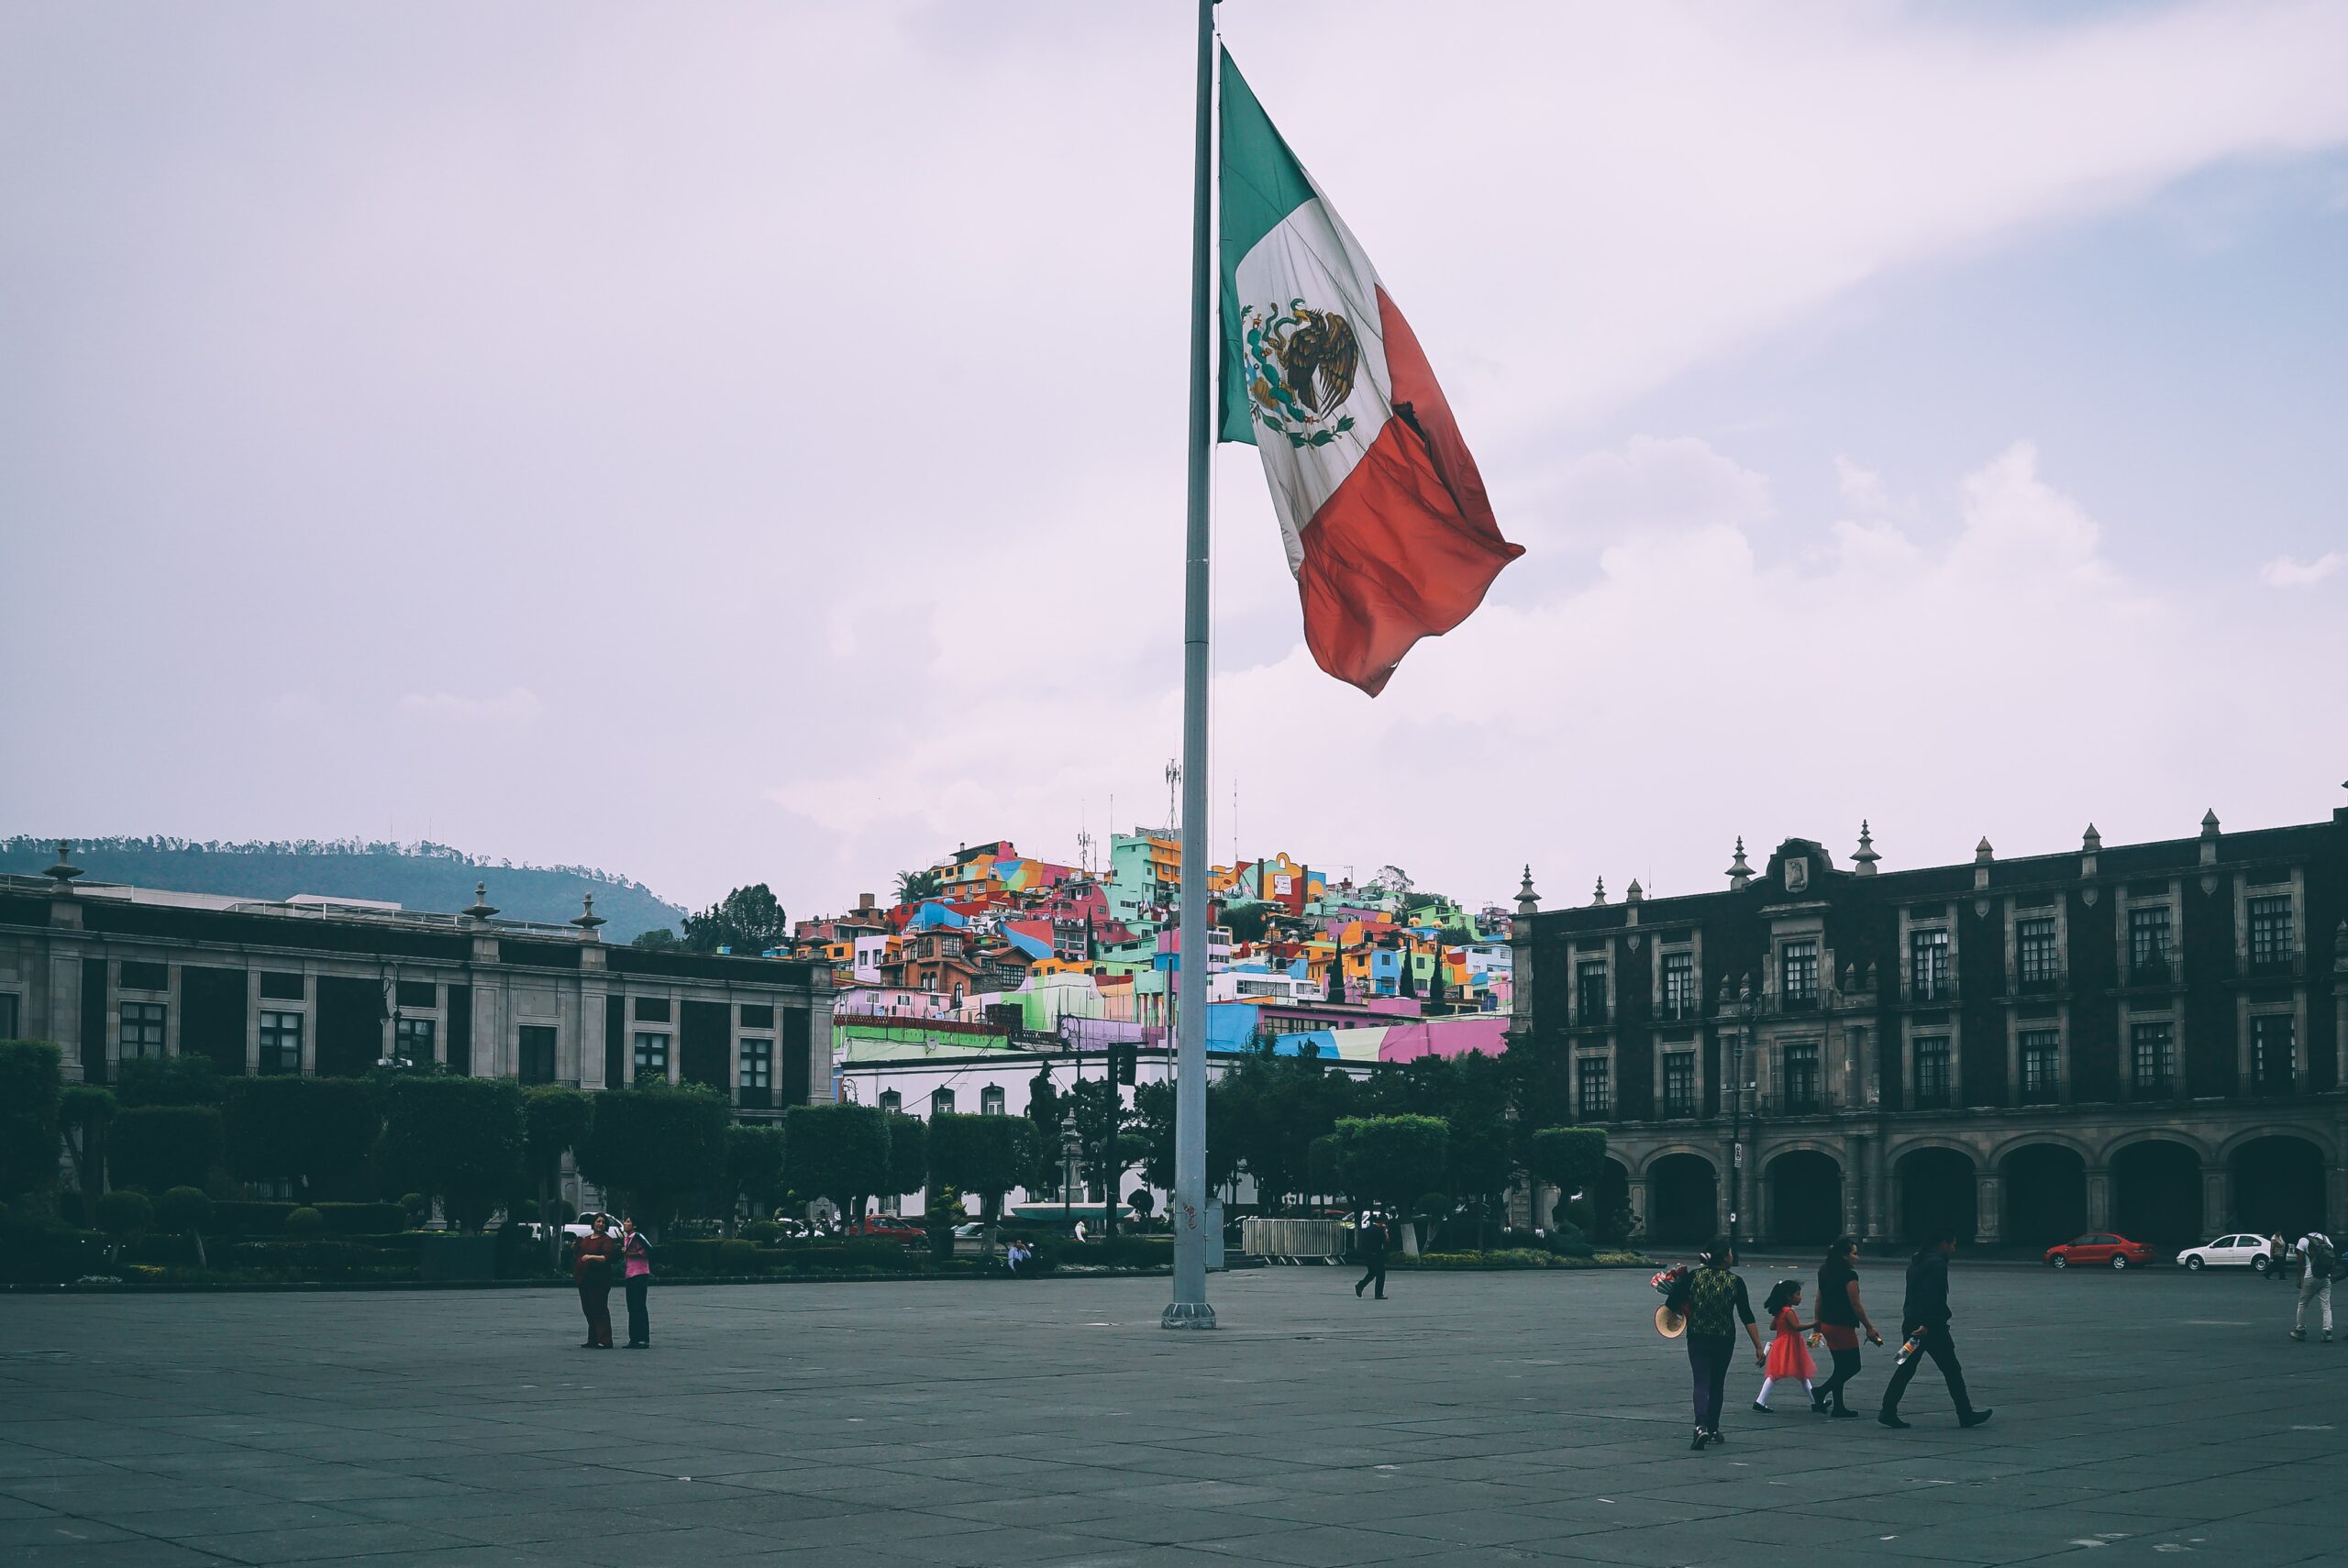 Photo by Ricardo Esquivel: https://www.pexels.com/photo/people-near-mexican-flag-1573471/